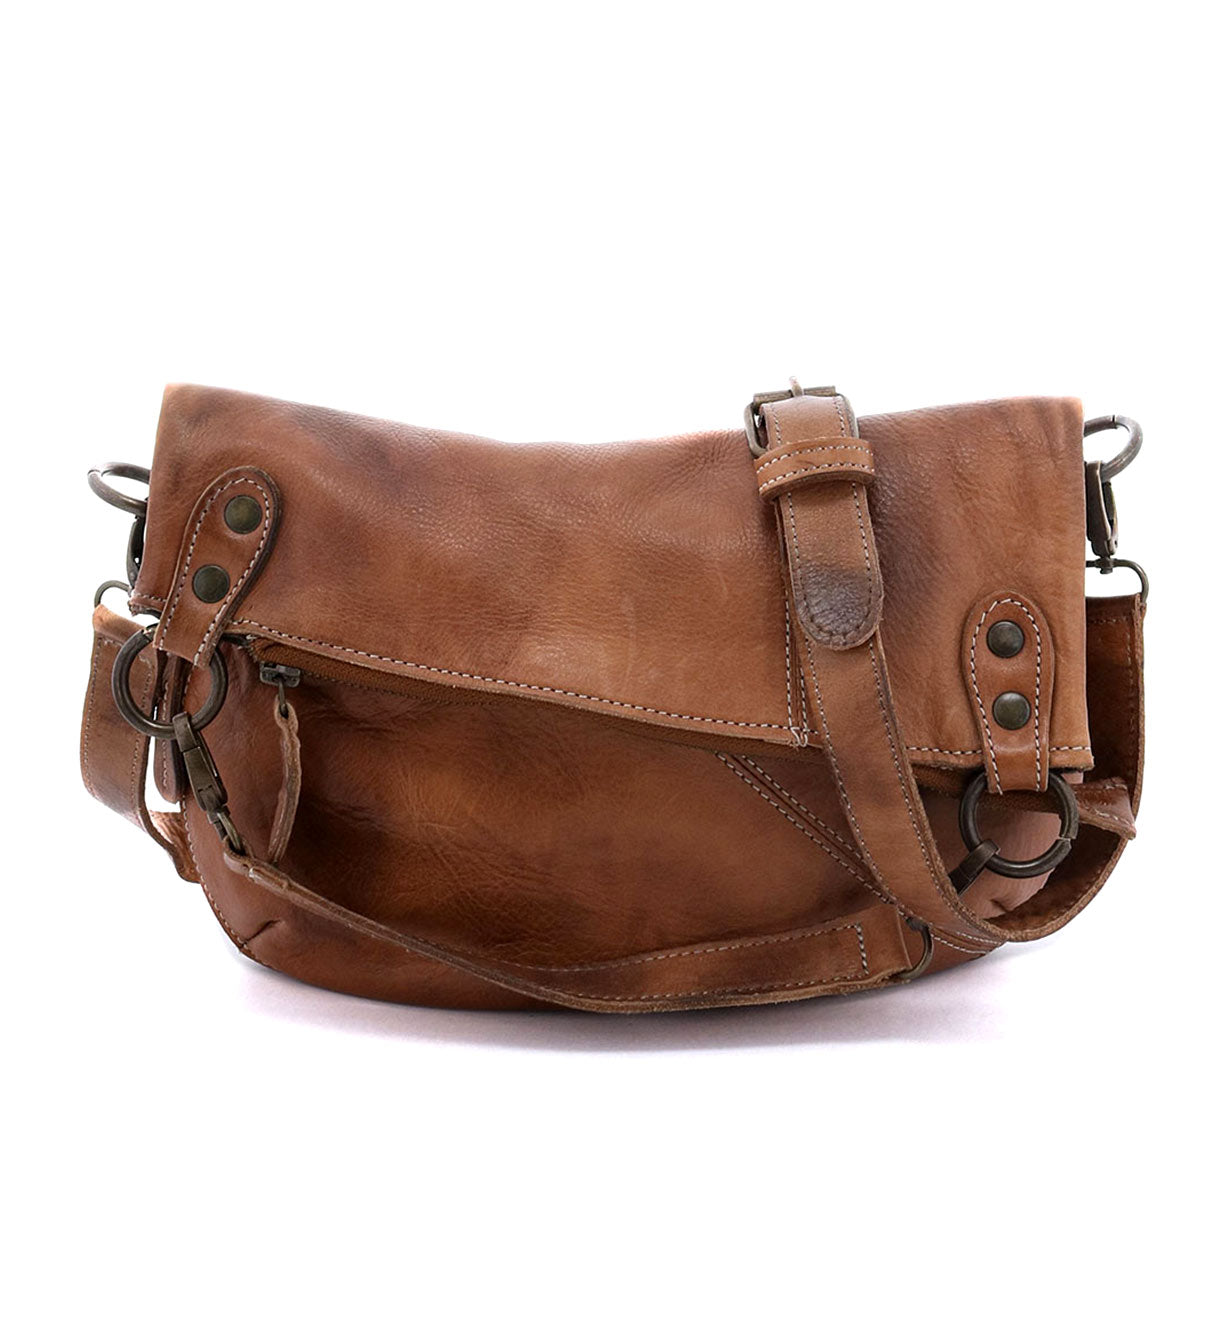 A brown leather crossbody bag with two straps, the Tahiti Bag by Bed Stu.